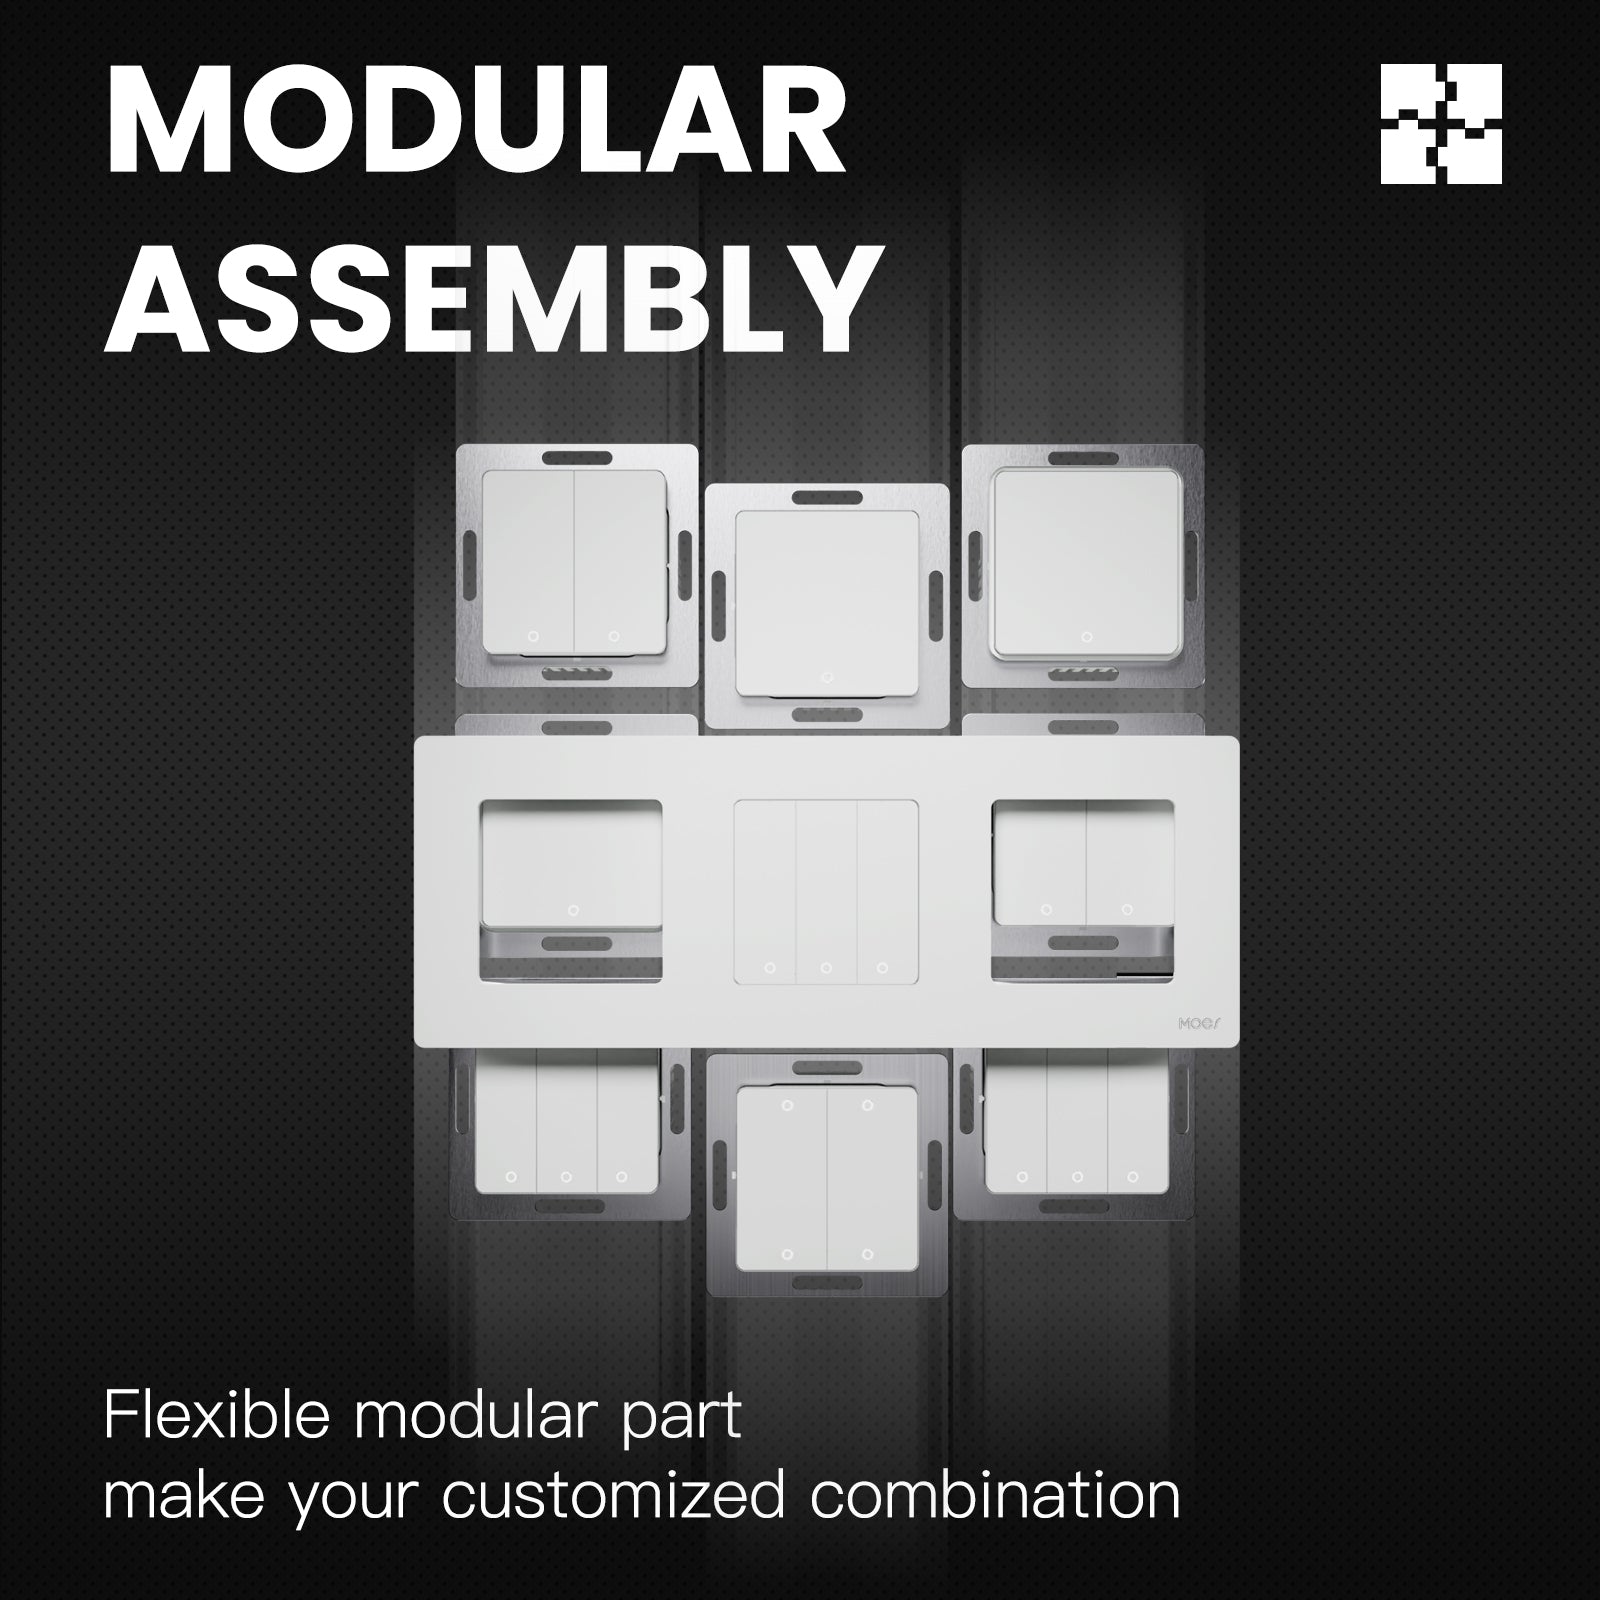 MODULAR ASSEMBLY - MOES